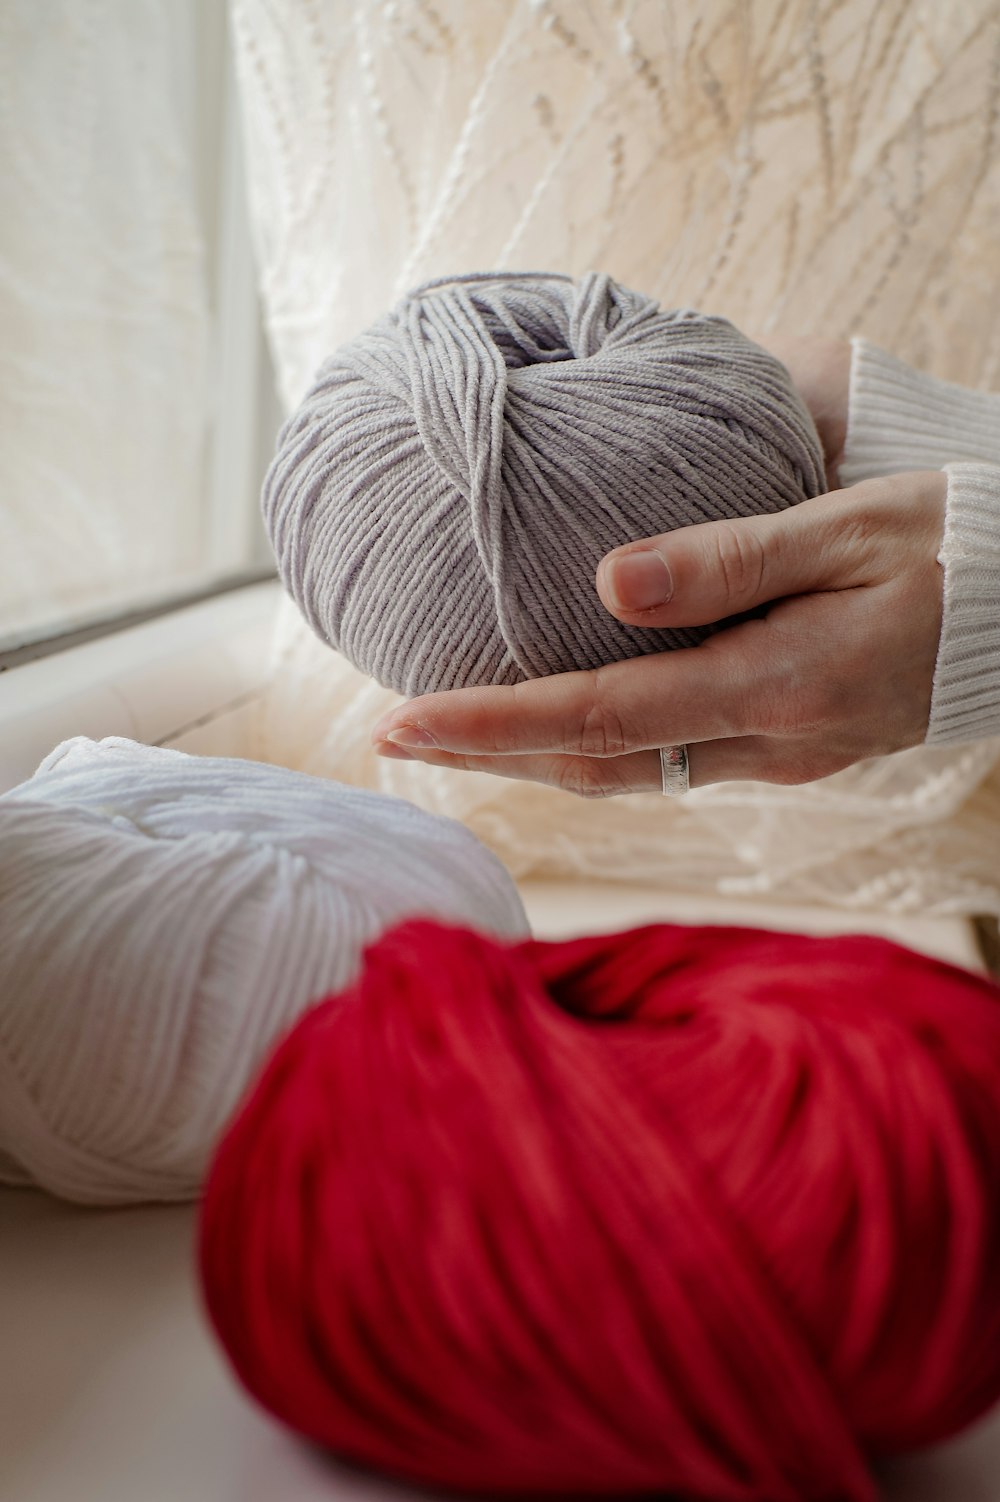 a person holding a ball of yarn in their hand